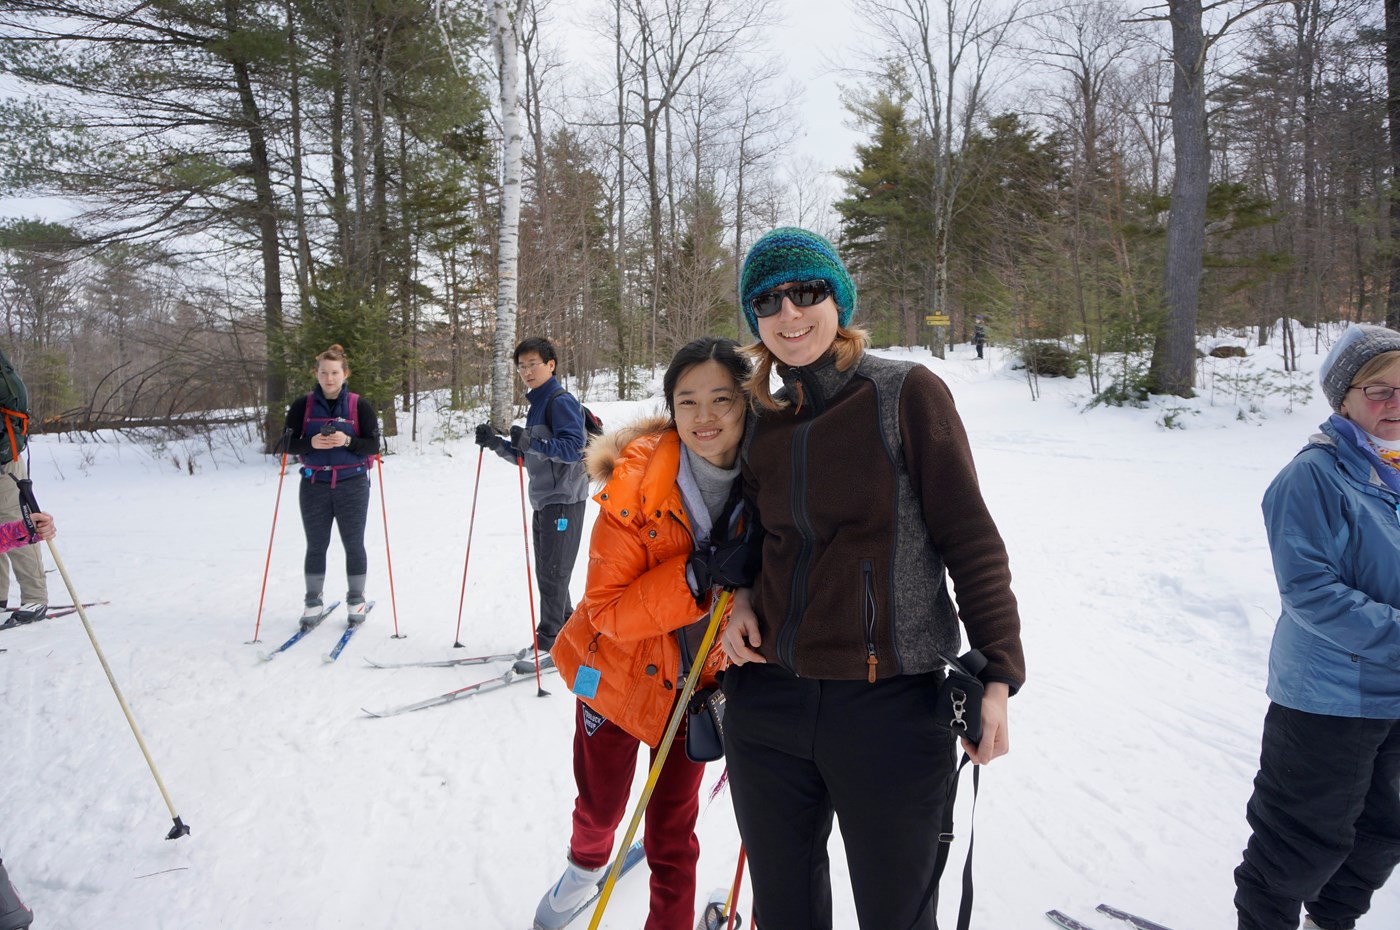 Students pose for picture smiling while cross country skiing.